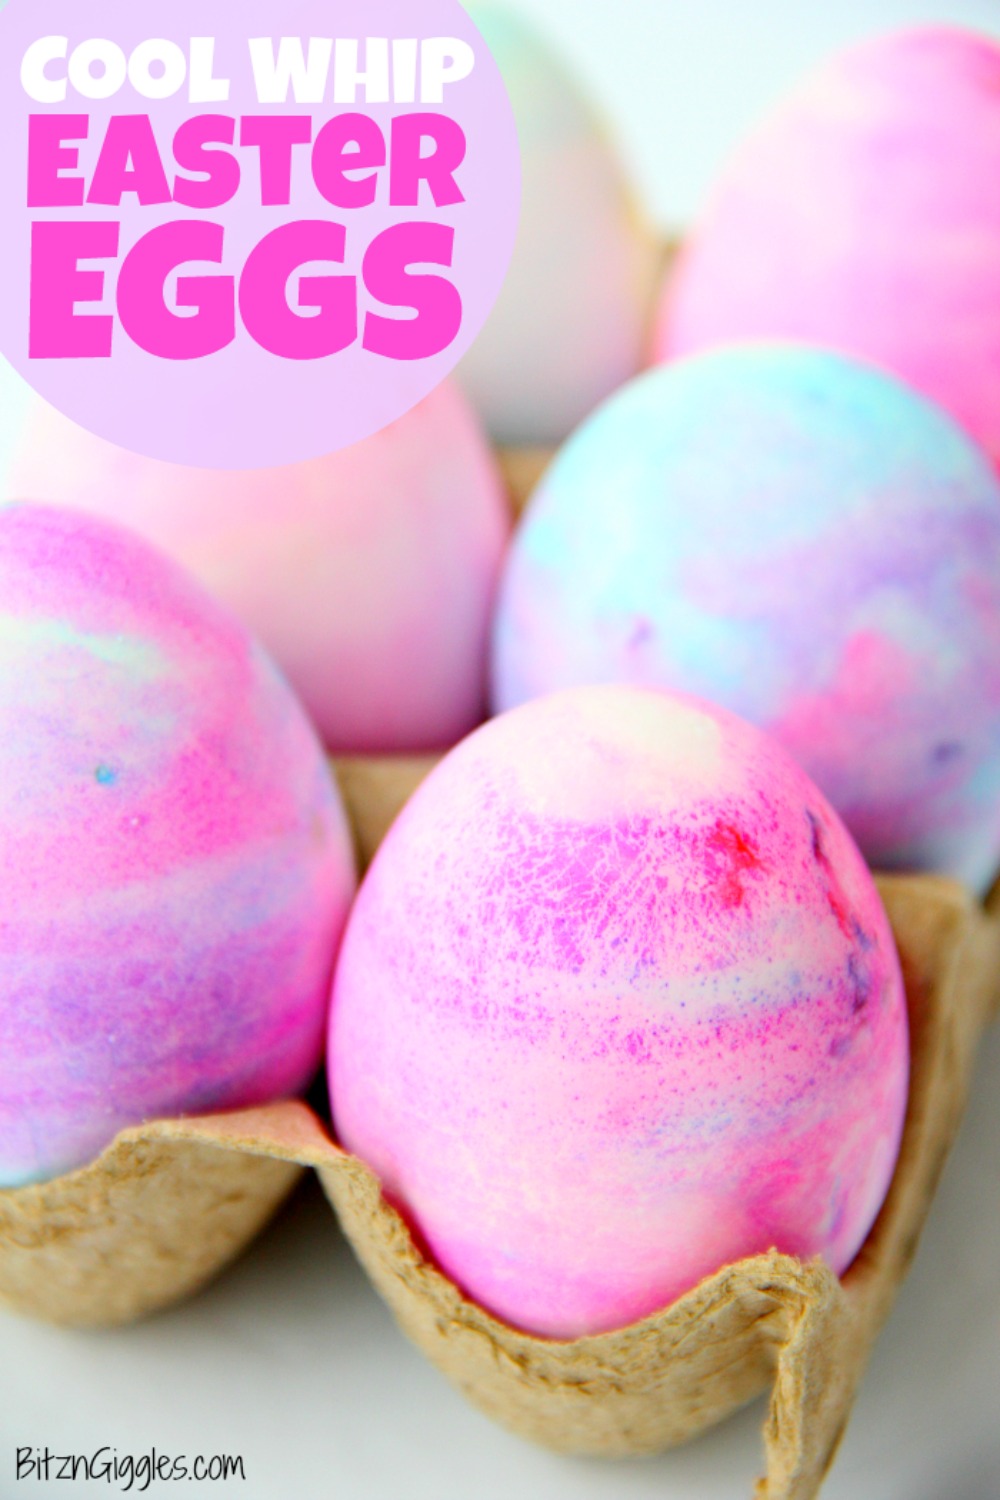 Cool Whip Easter Eggs - Cool Whip helps produce swirls of gorgeous color in this family-friendly DIY easter egg dyeing method!